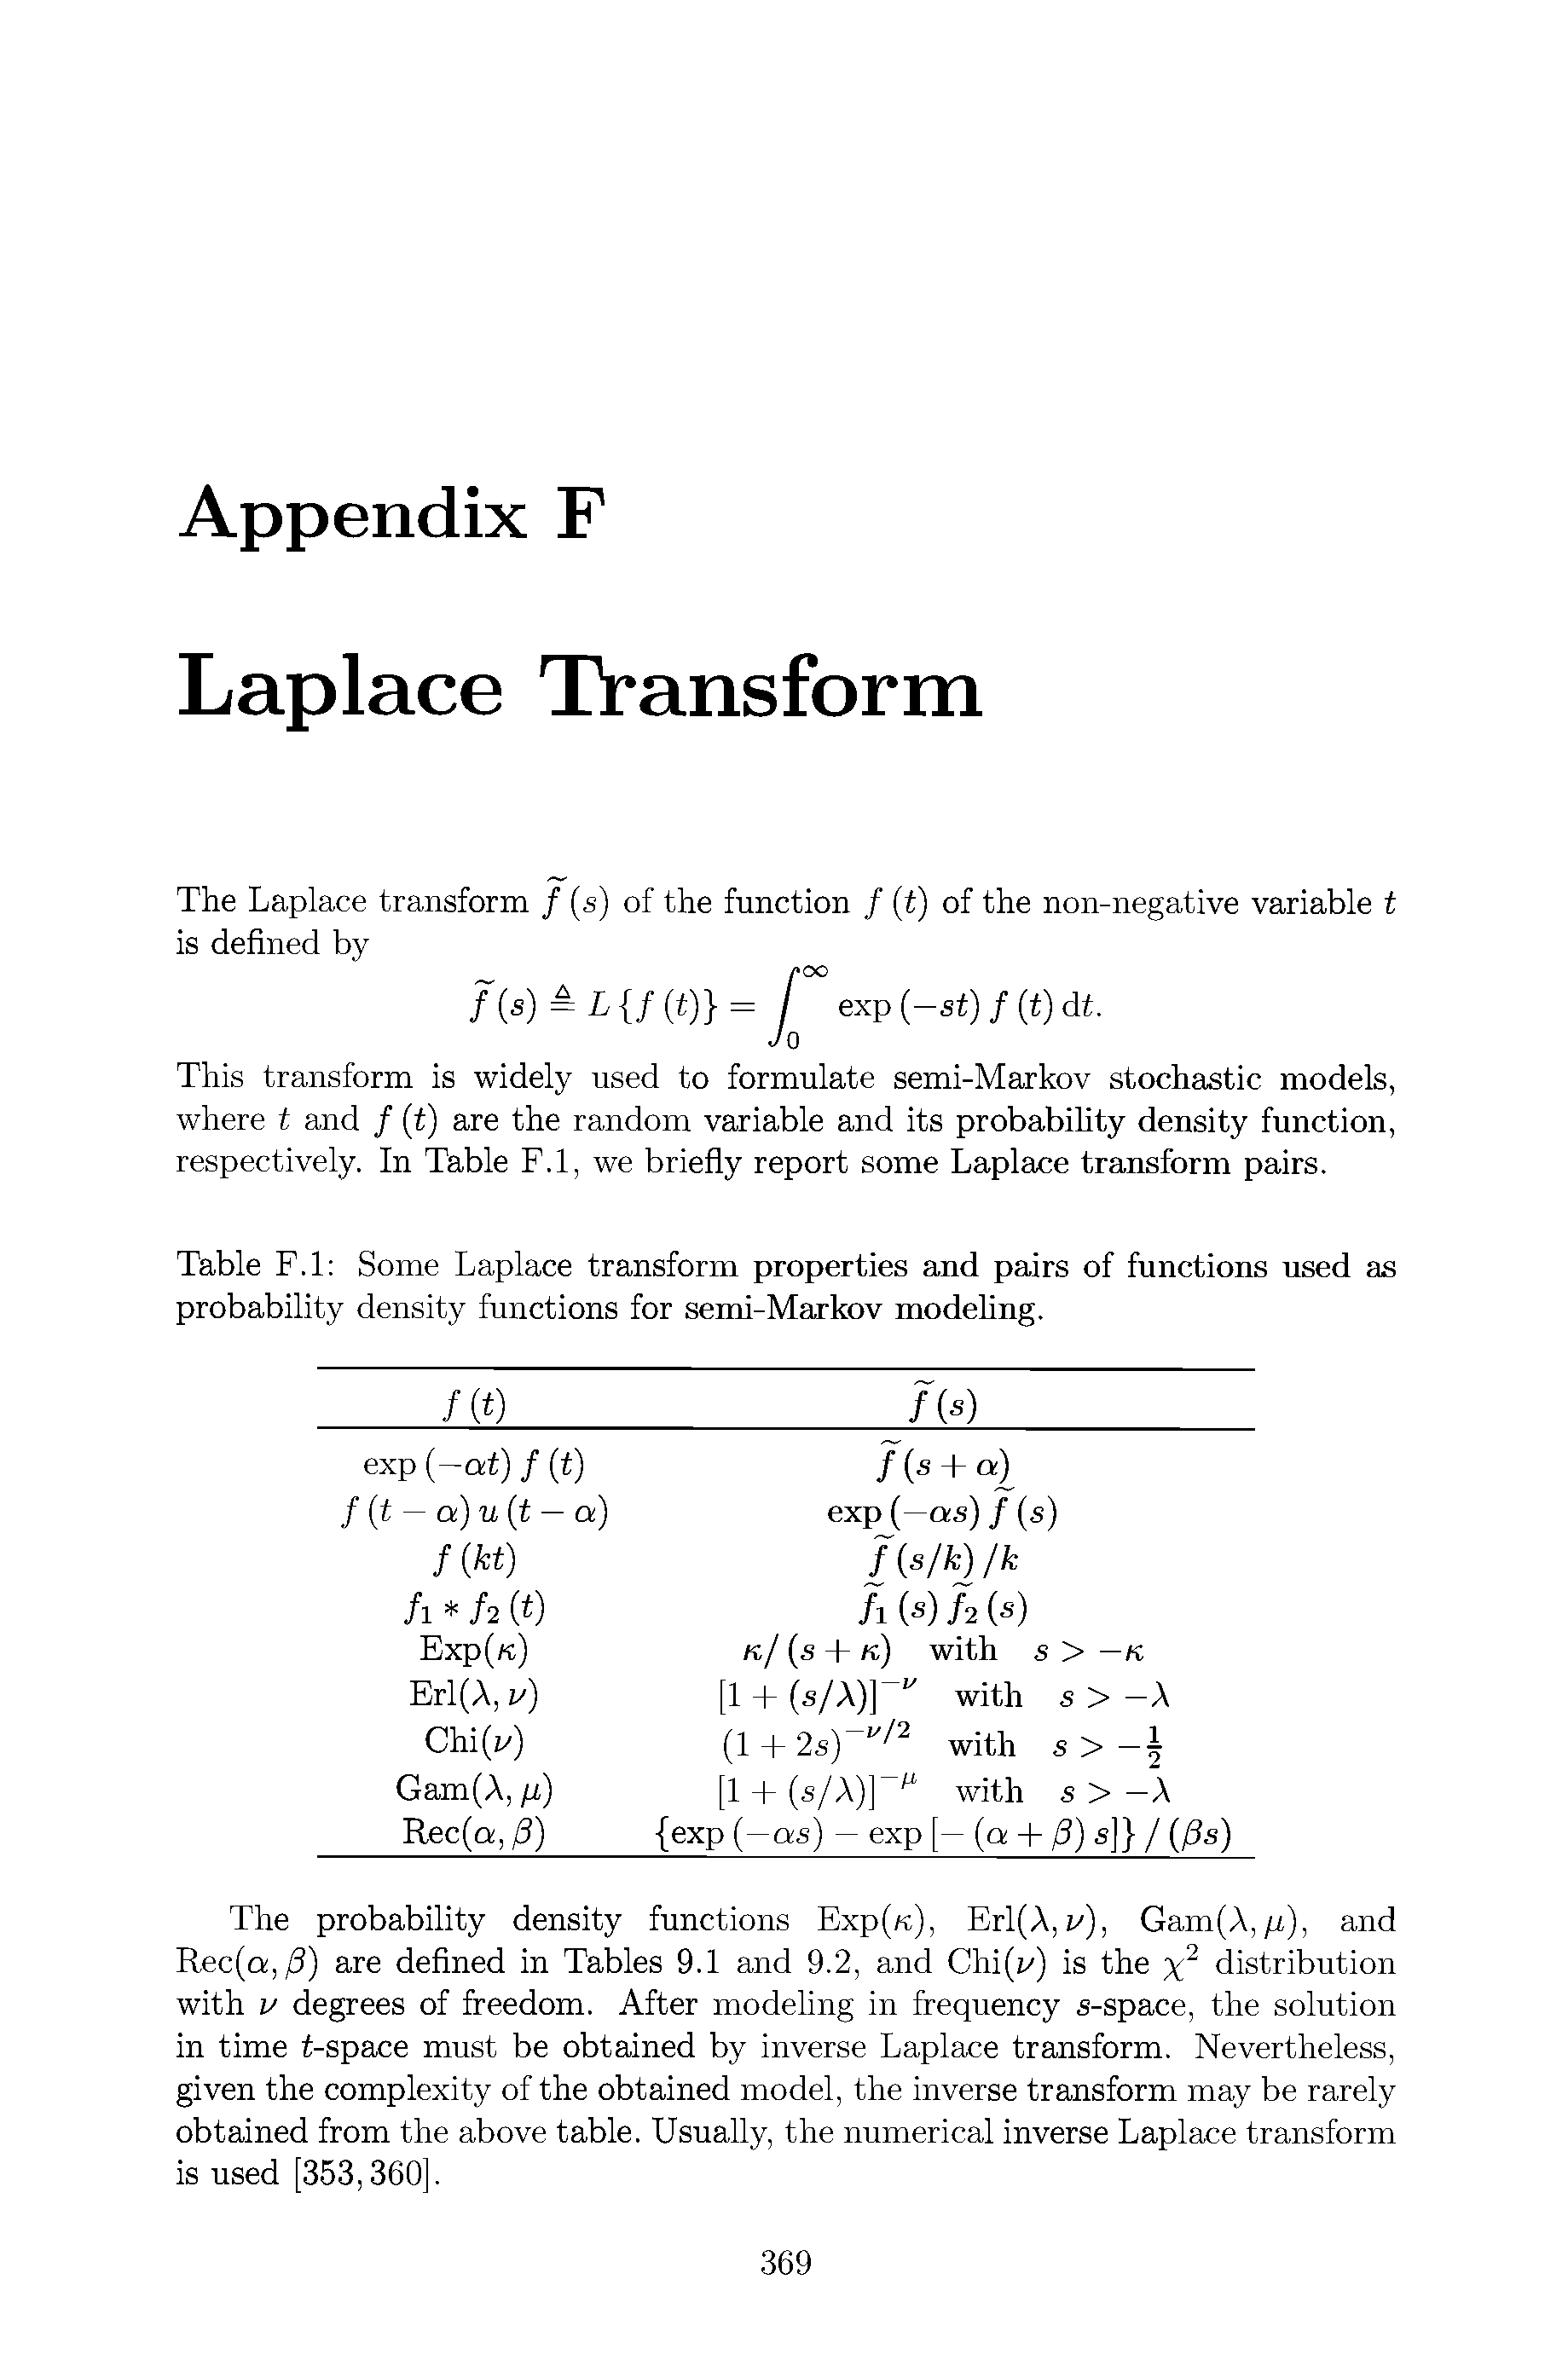 Table F.l Some Laplace transform properties and pairs of functions used as probability density functions for semi-Markov modeling.